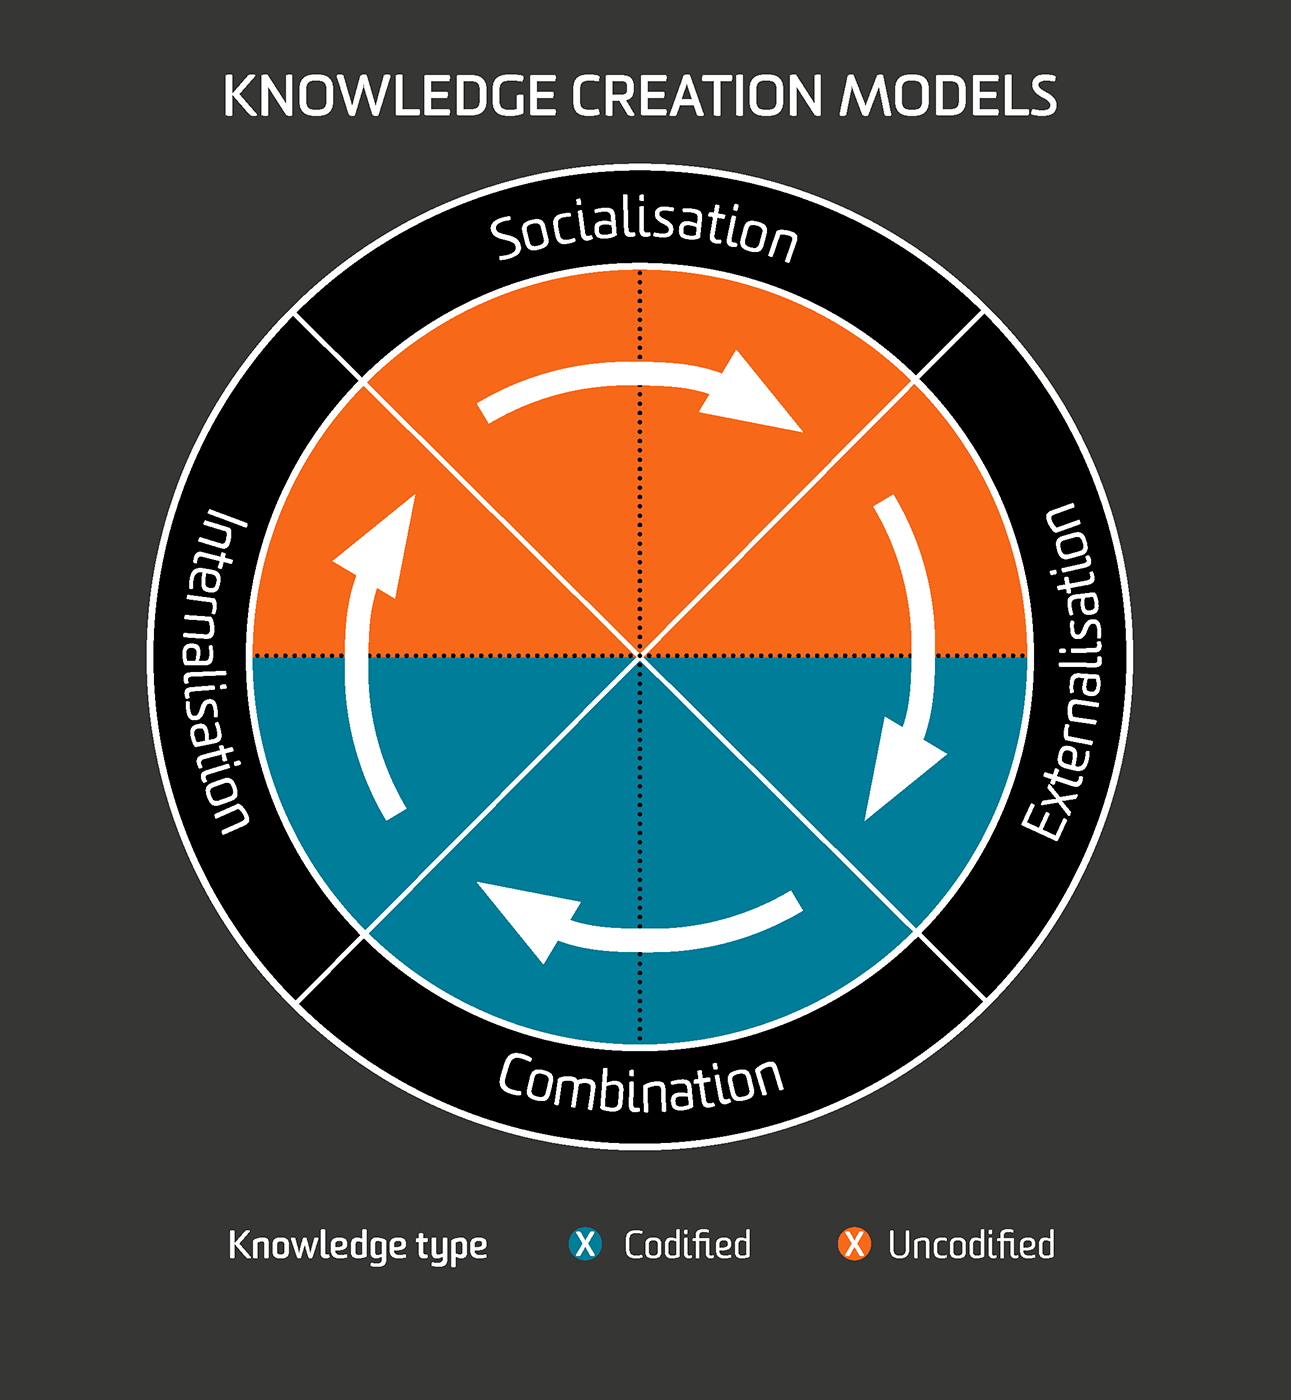 Knowledge creation models